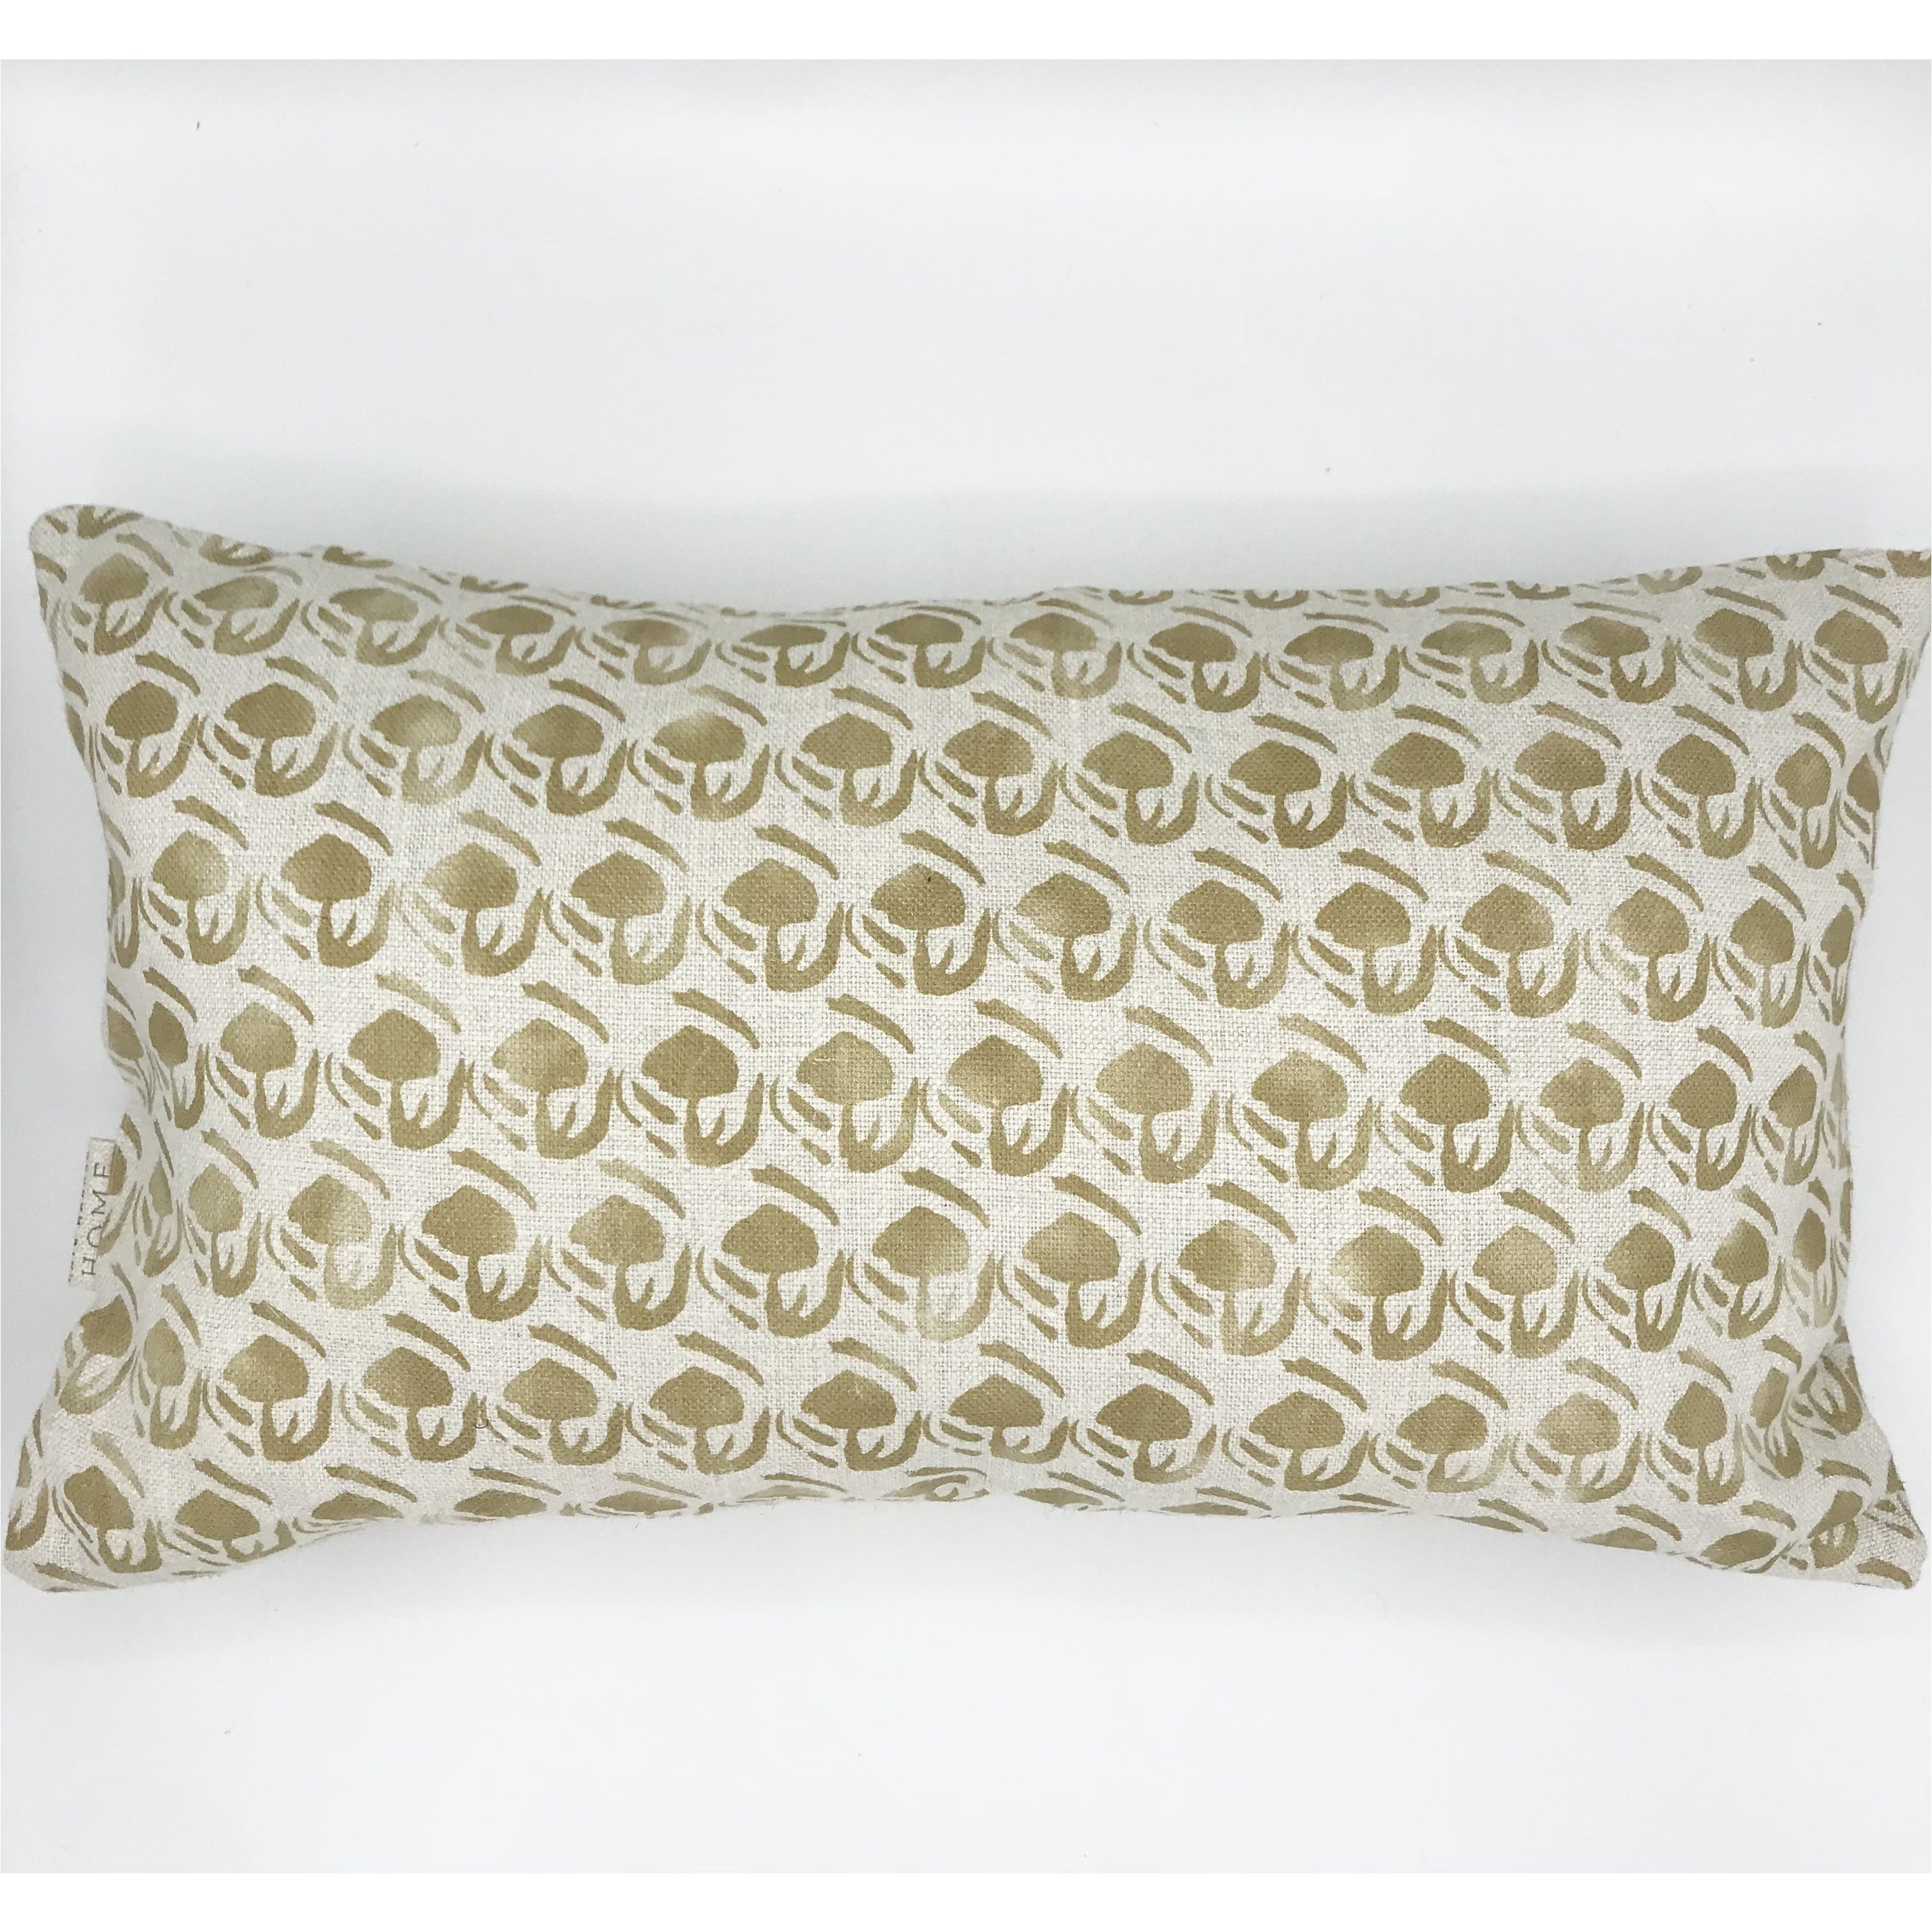 The Lillian Pillow Cover